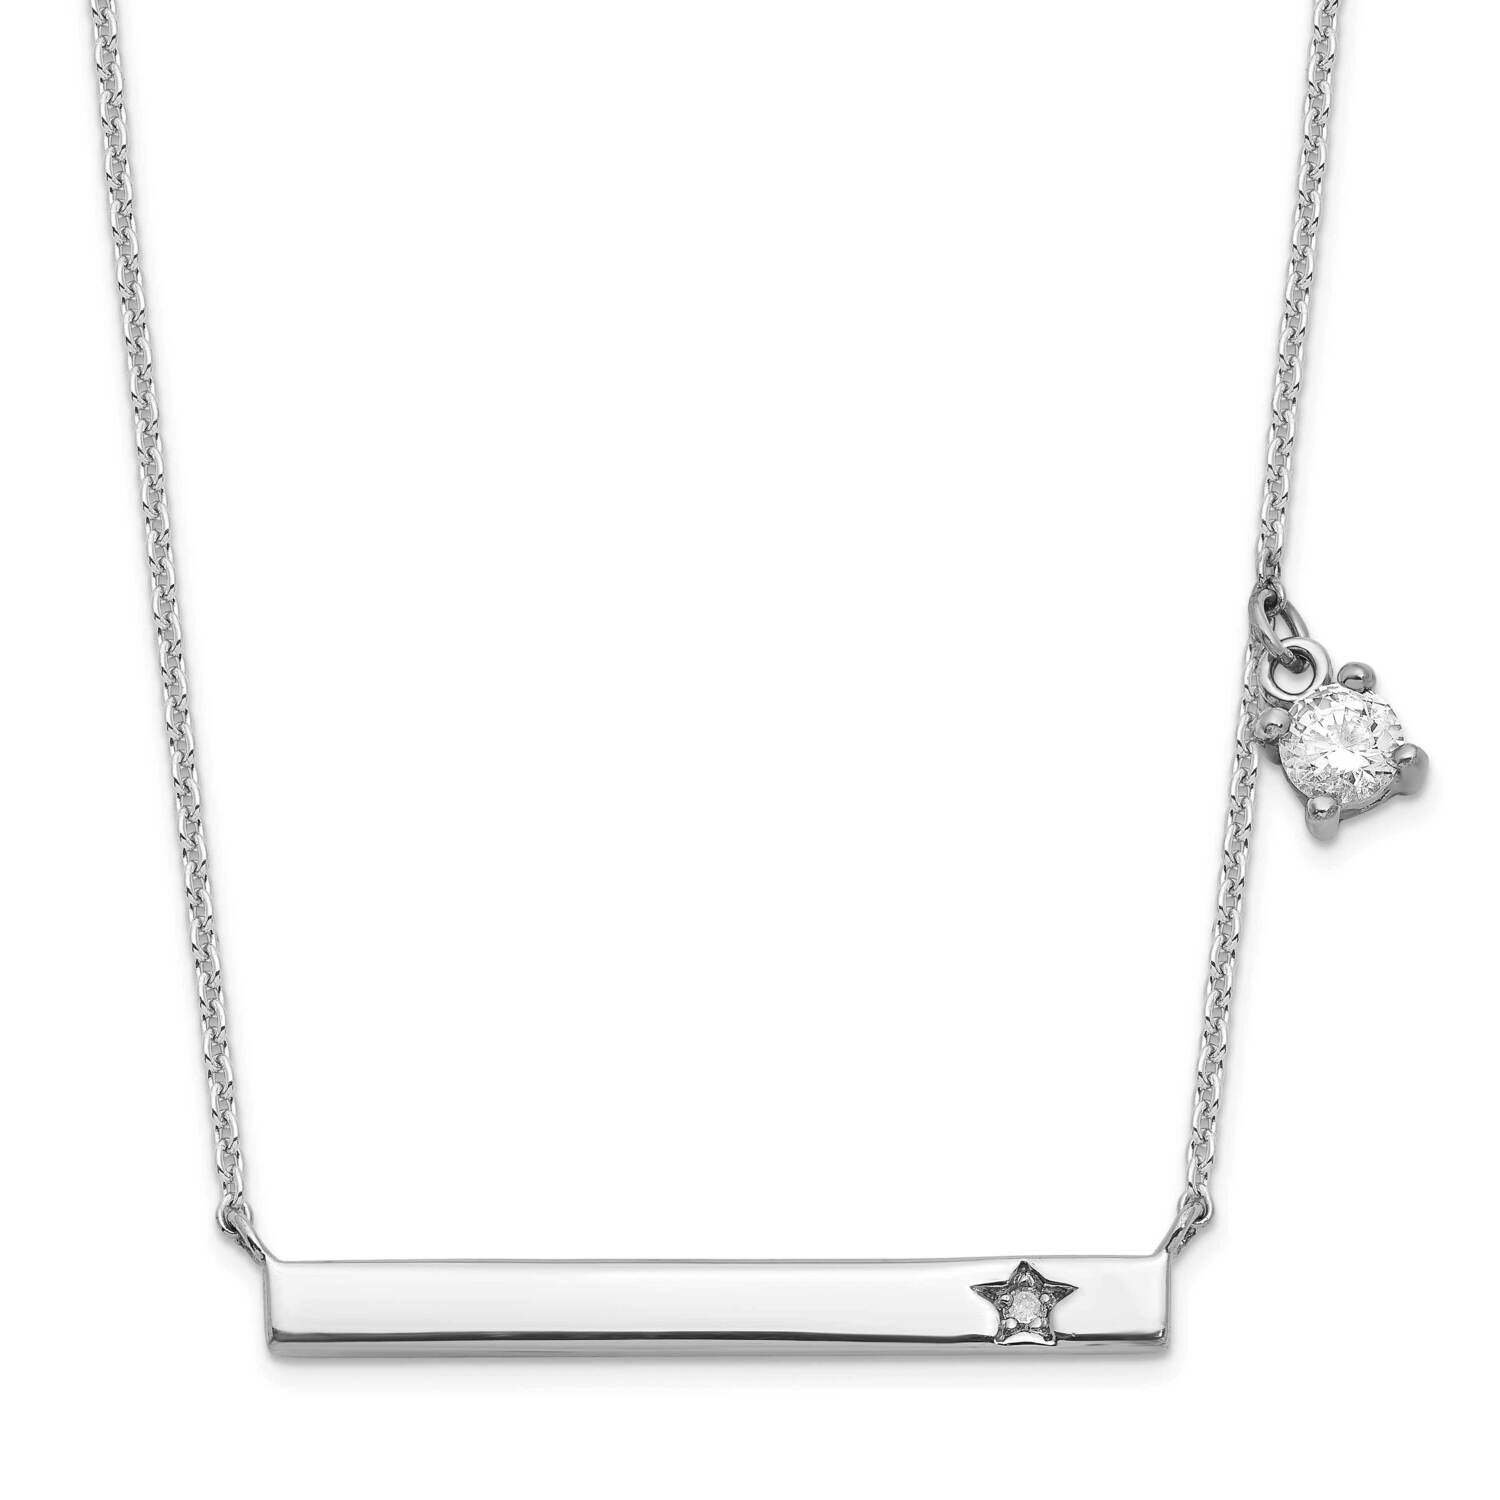 CZ Diamond and Diamond with 1.25 Inch Extender Bar Necklace 16.5 Inch Sterling Silver Rhodium-Plated QG6175-16.5